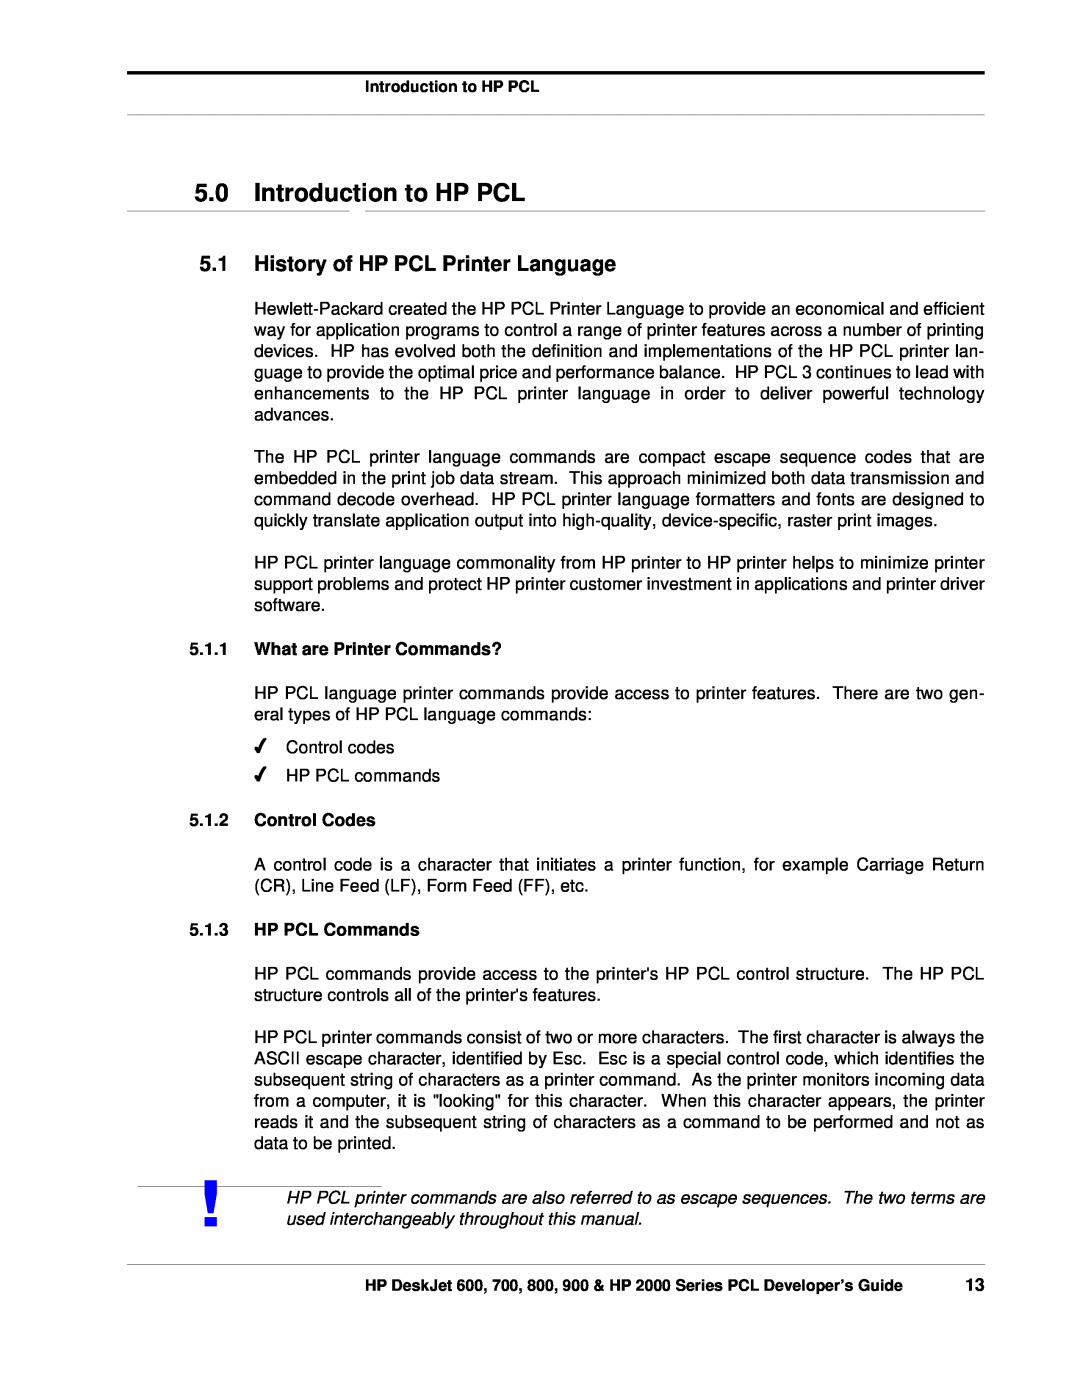 HP 700, 800 manual Introduction to HP PCL, History of HP PCL Printer Language, What are Printer Commands?, Control Codes 